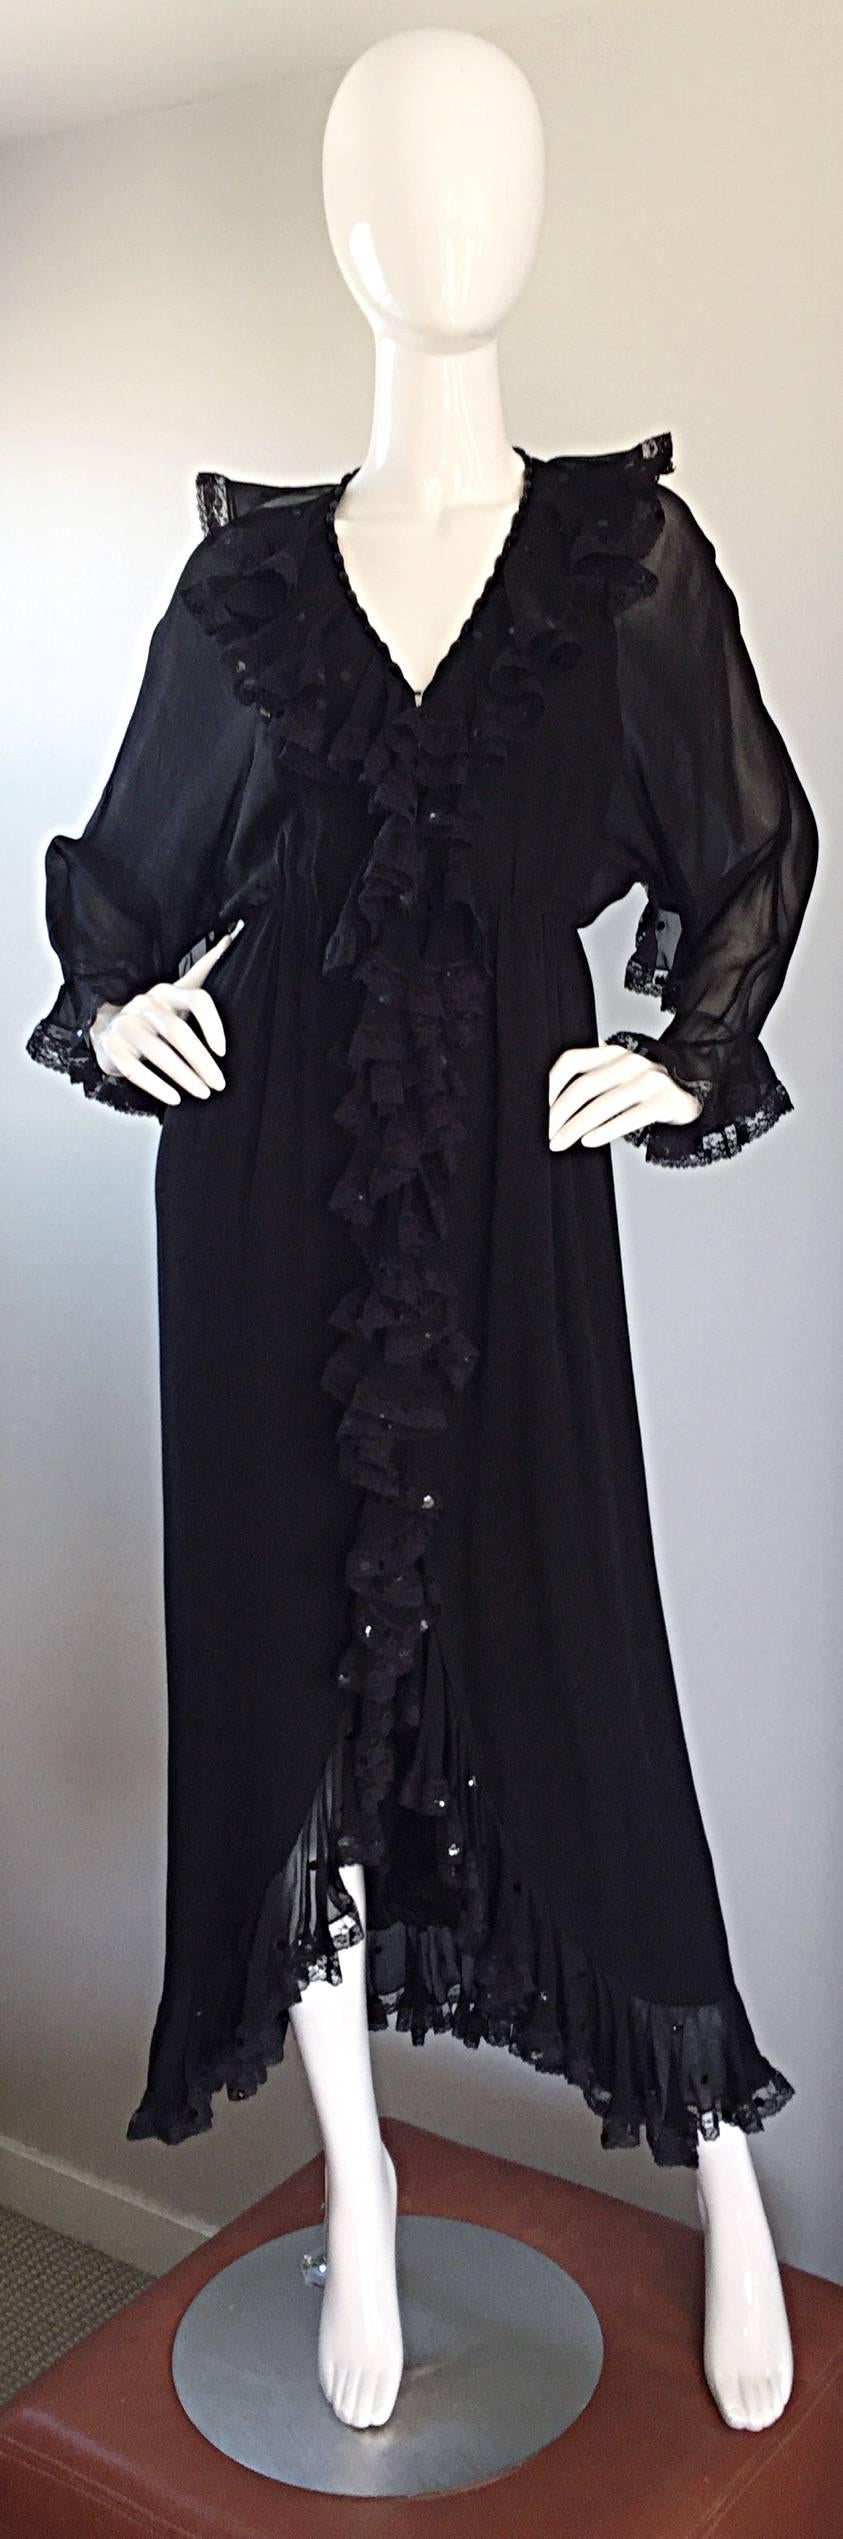 Absolutely insanely gorgeous vintage 1970s BILL BLASS black silk chiffon long sleeve dress! Features intricately detailed silk lace ruffles down the front of the dress, sleeves and collar. Semi sheer chiffon sleeves. Demi couture quality, with